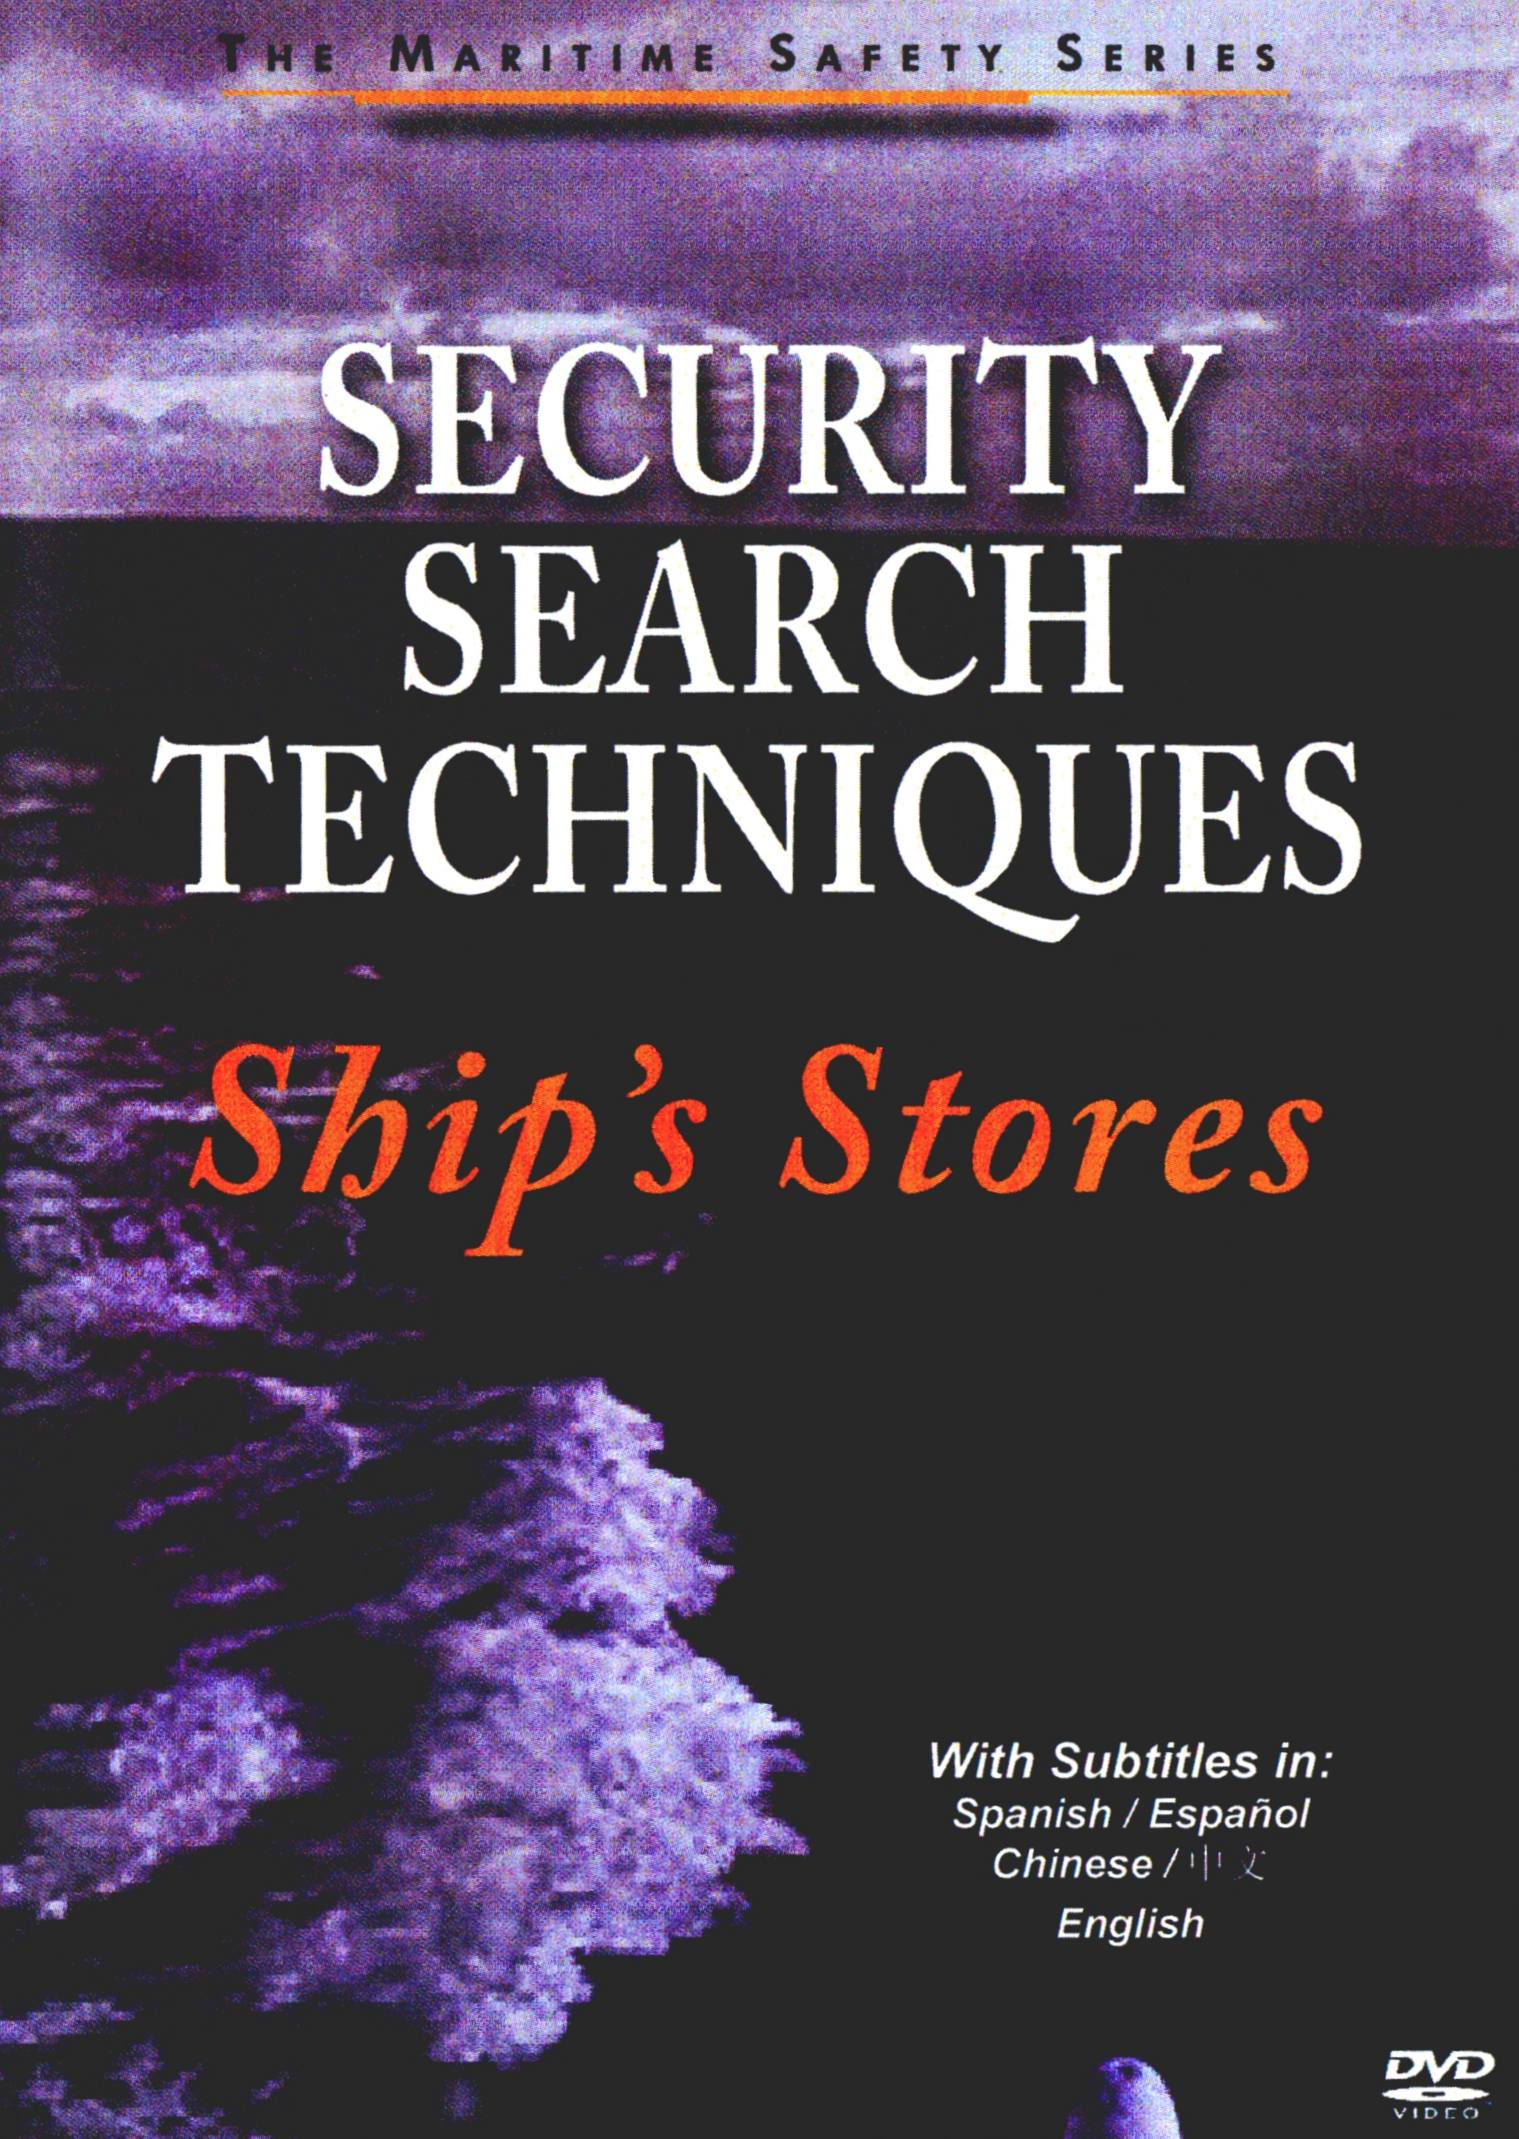 Security Search Techniques: Ship's Stores